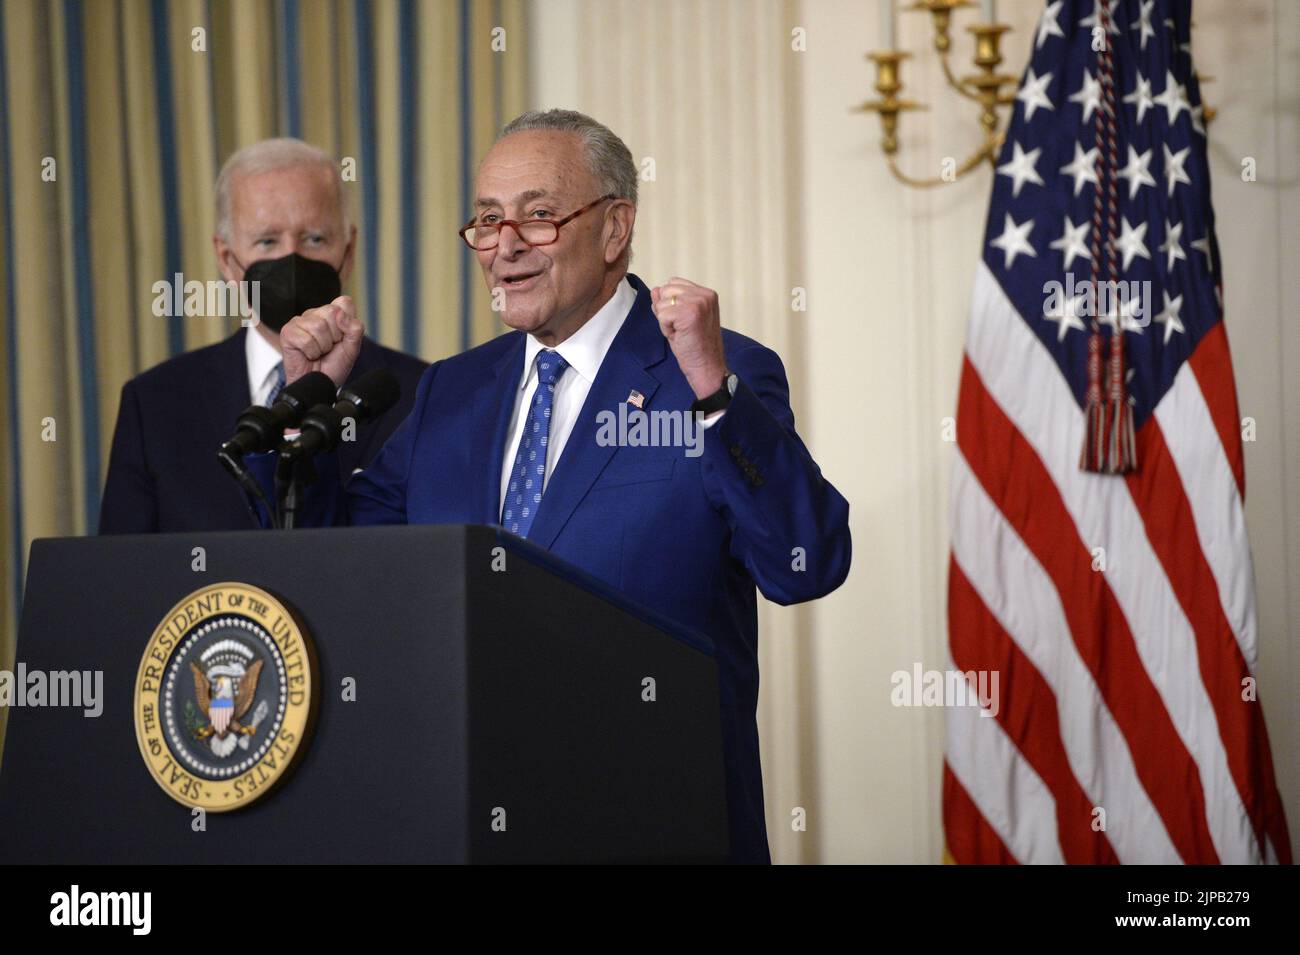 Washington, United States. 16th Aug, 2022. Senate Majority Leader Chuck Schumer, D-NY, speaks as President Joe Biden looks on during a bill signing ceremony for the Inflation Reduction Act of 2022, a $737 billion act focused on slowing climate change, lowering health care costs and creating more clean energy jobs, in the State Dining Room at the White House in Washington, DC on Tuesday, August 16, 2022. Photo by Bonnie Cash/UPI Credit: UPI/Alamy Live News Stock Photo